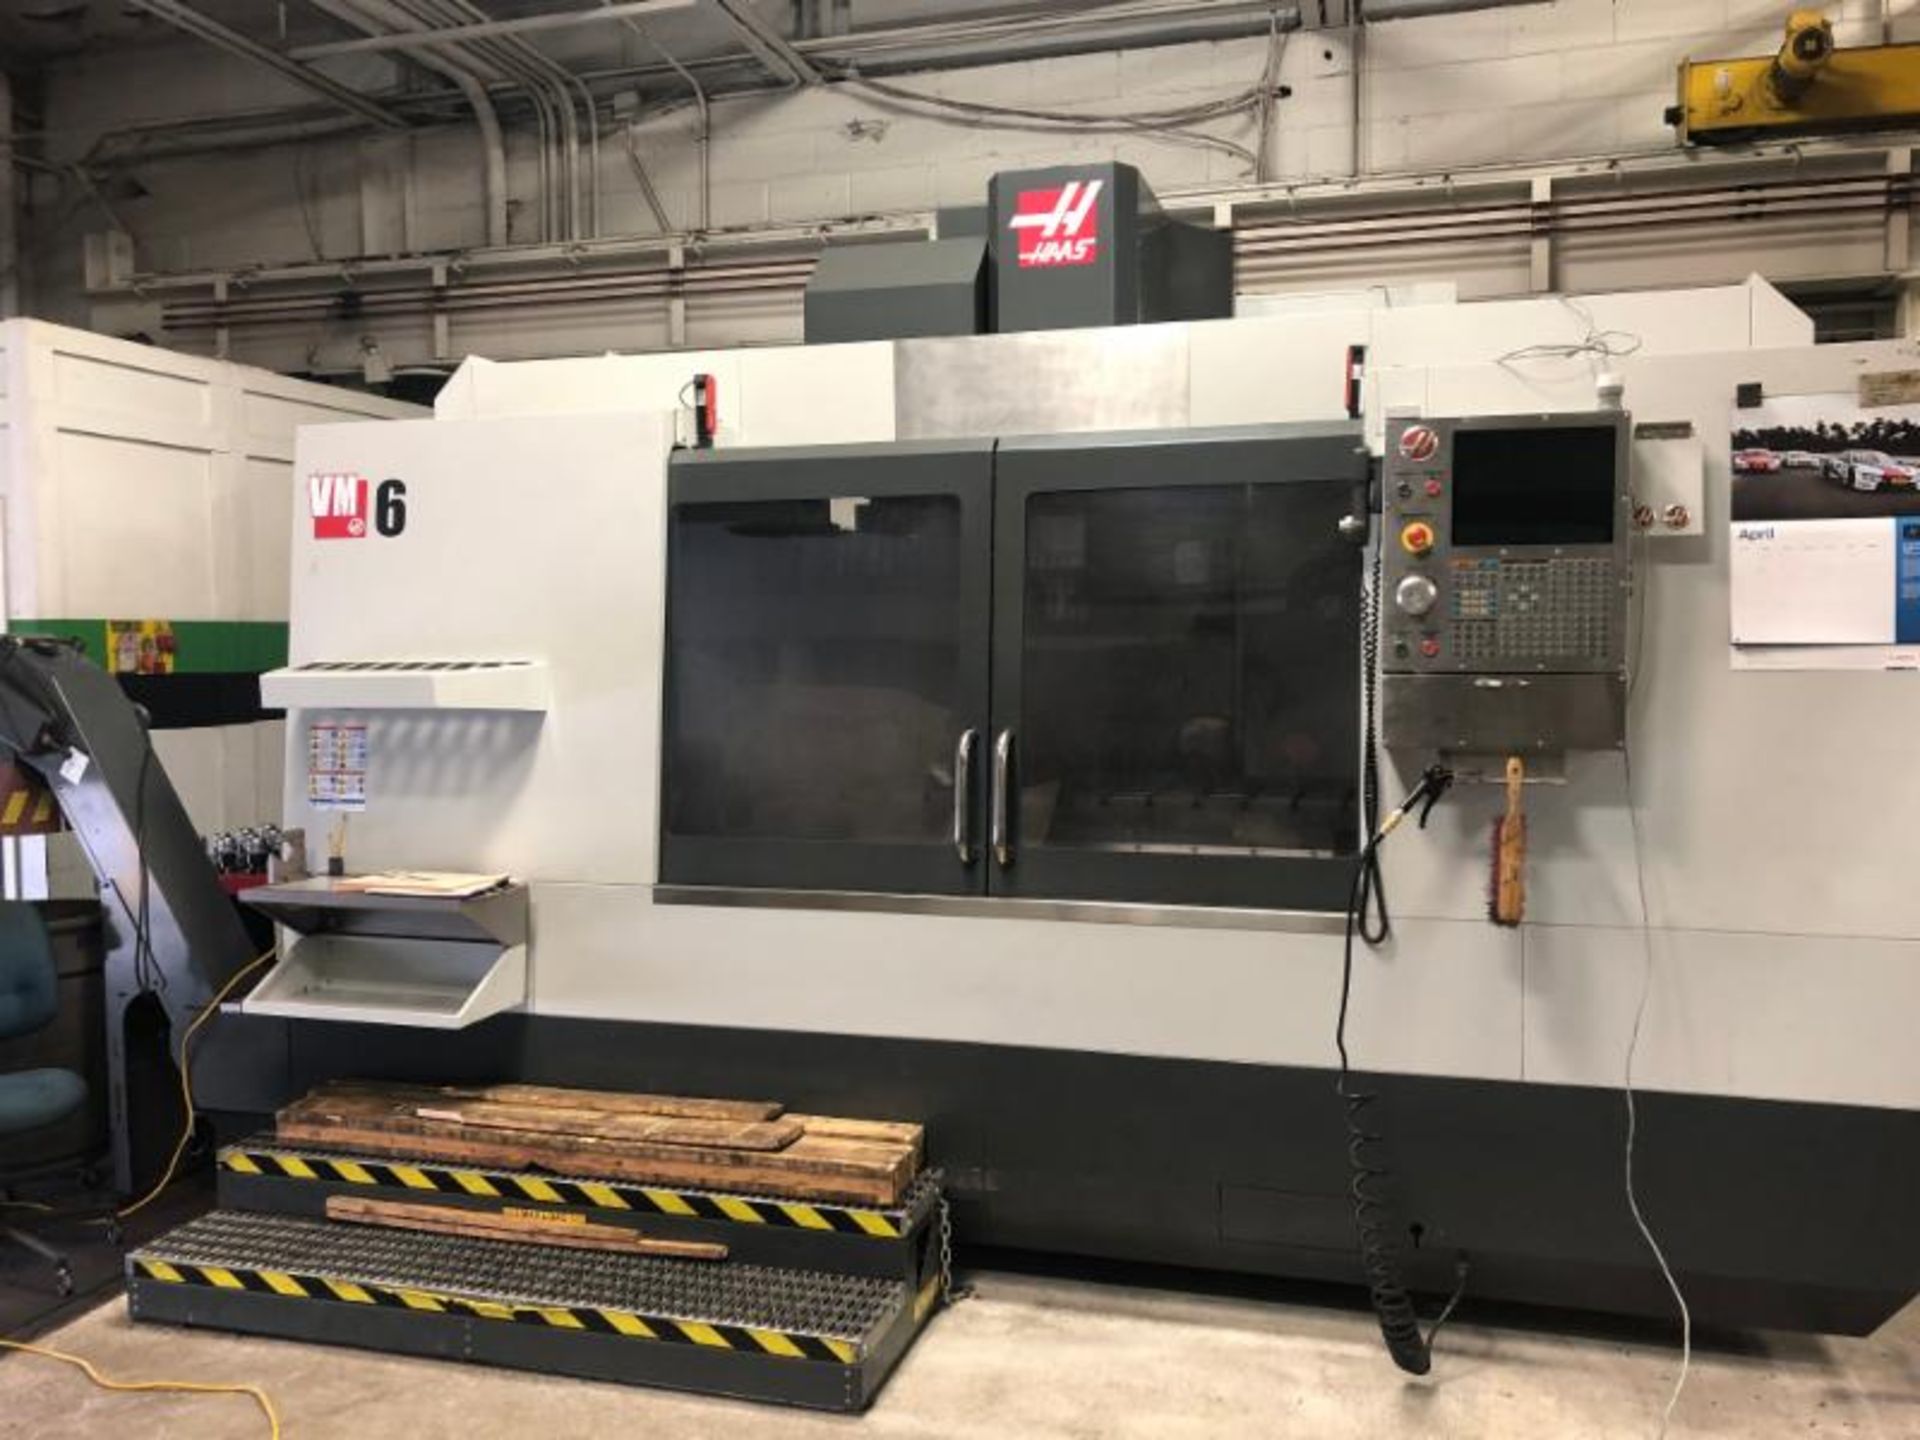 Haas Model VM-6 3-Axis Mold Maker CNC Vertical Machining Center - Image 14 of 17